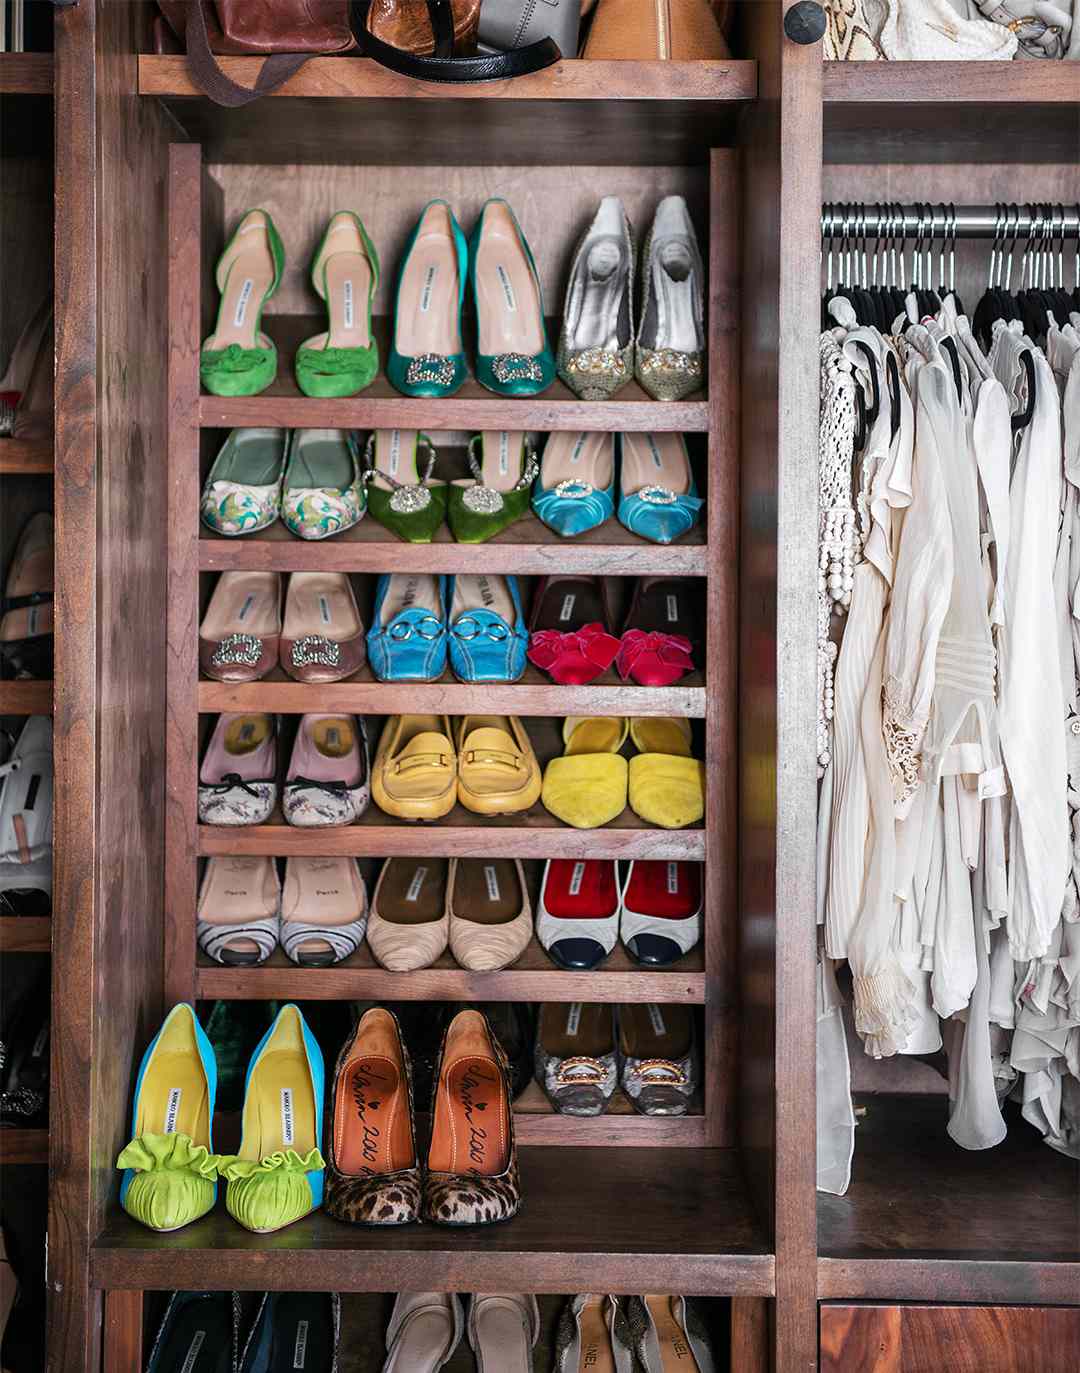 Top Organizing Tips For Closets Better Homes Gardens,Home Is Where The Heart Is Meme